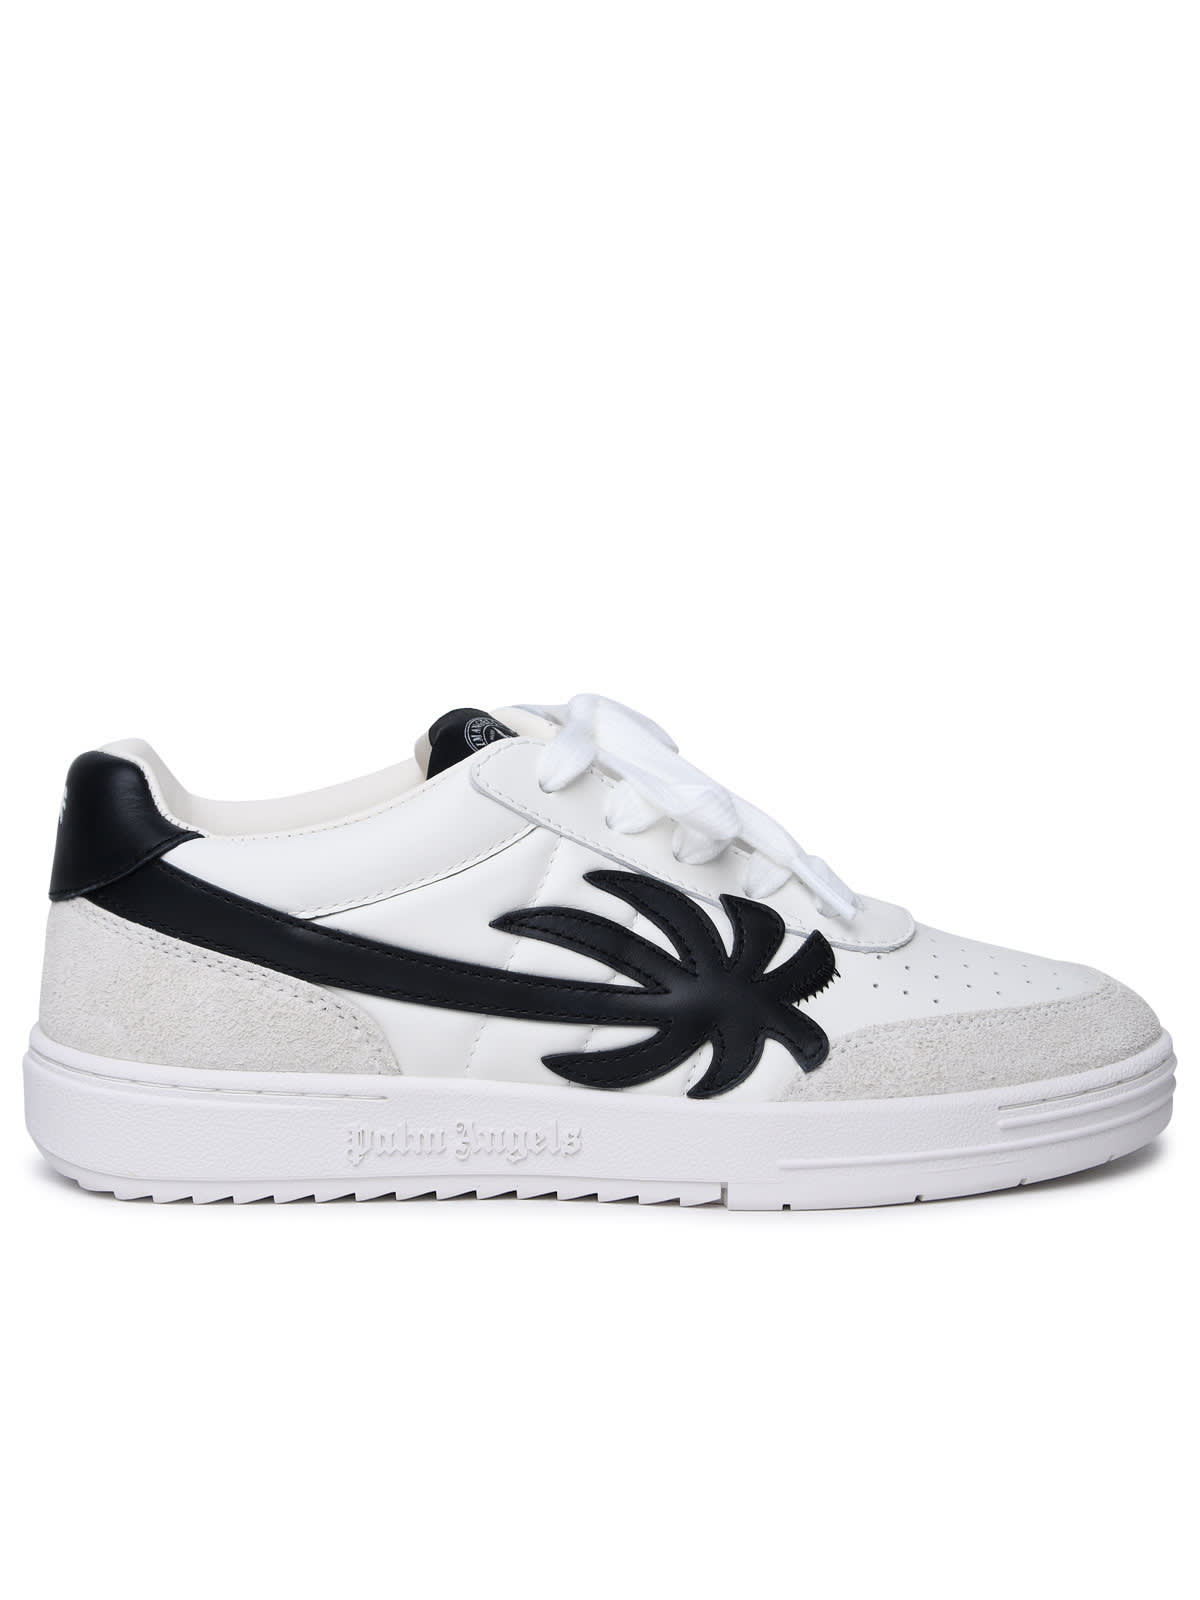 Shop Palm Angels Palm Beach University White Leather Sneakers In Black/red